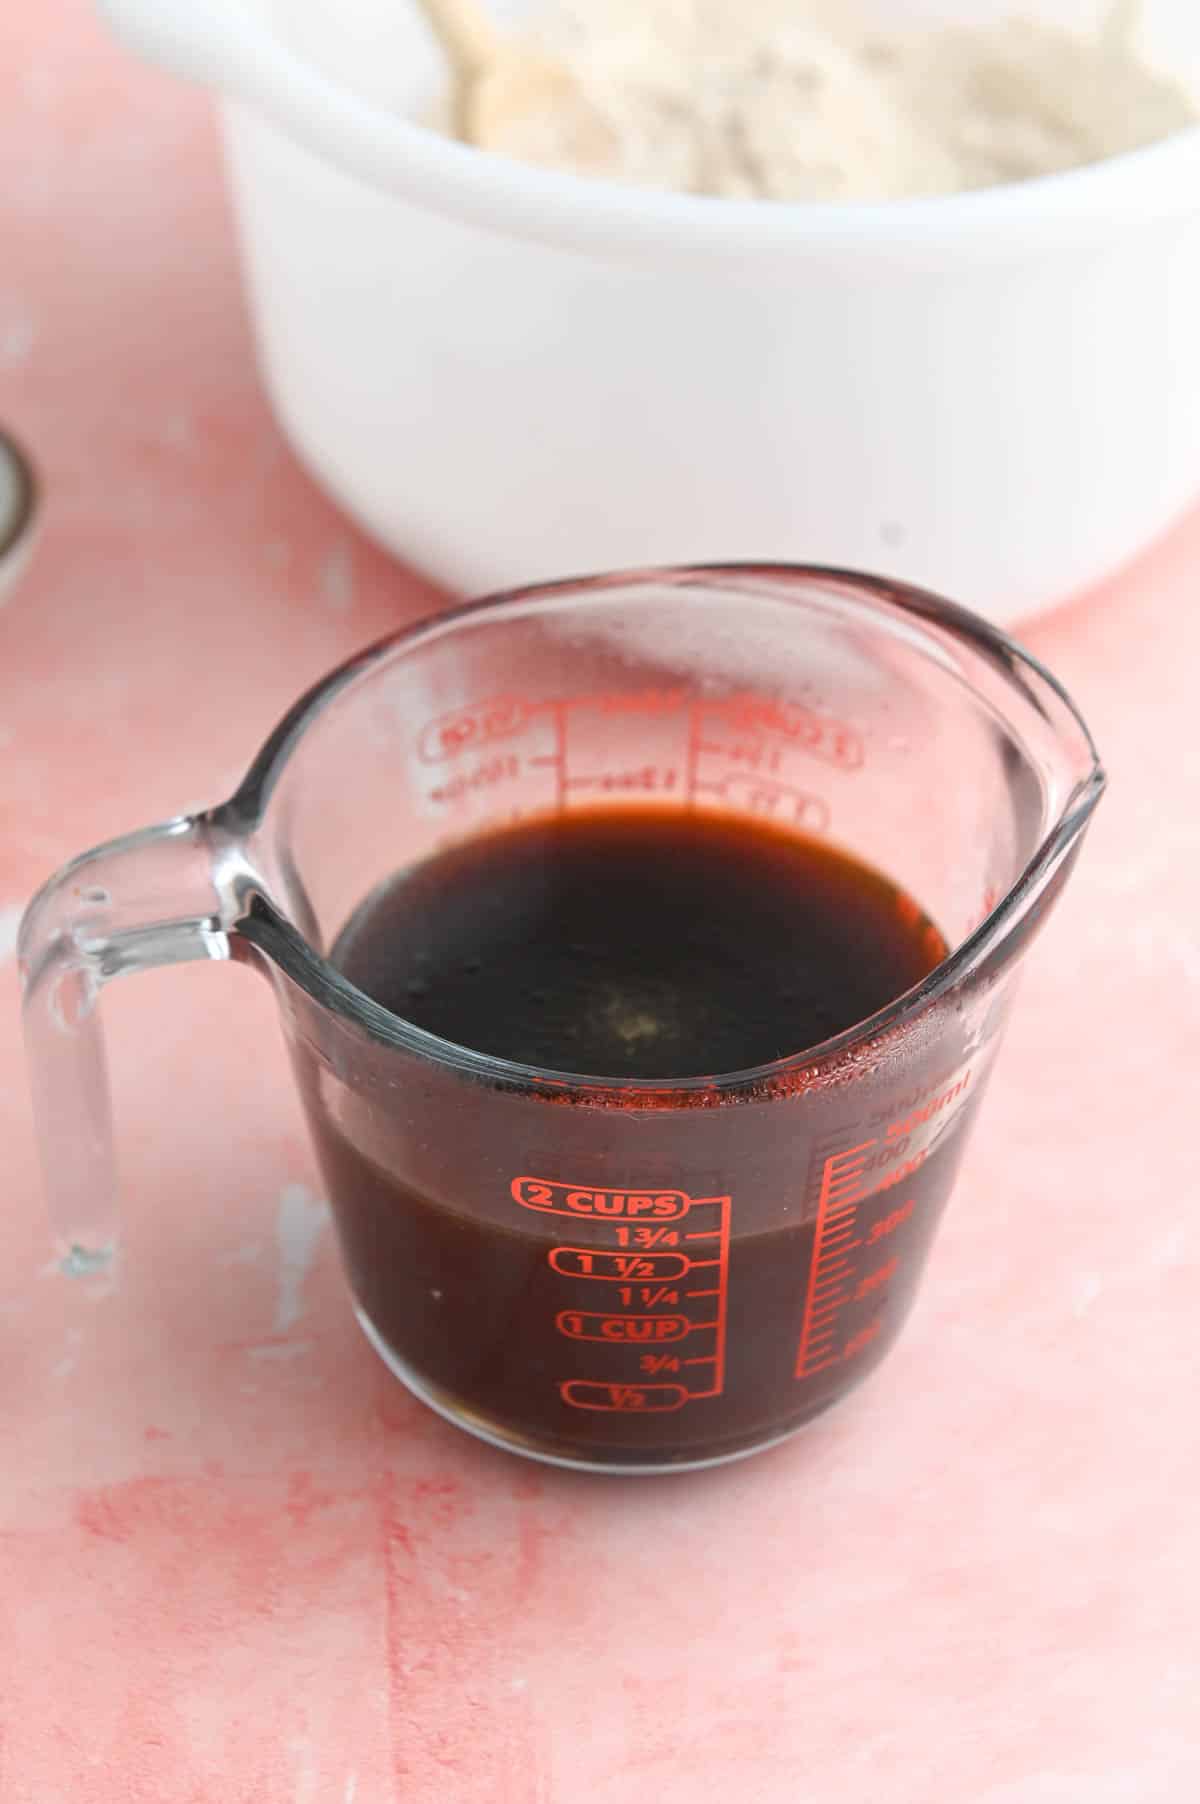 Molasses in a glass measuring cup.